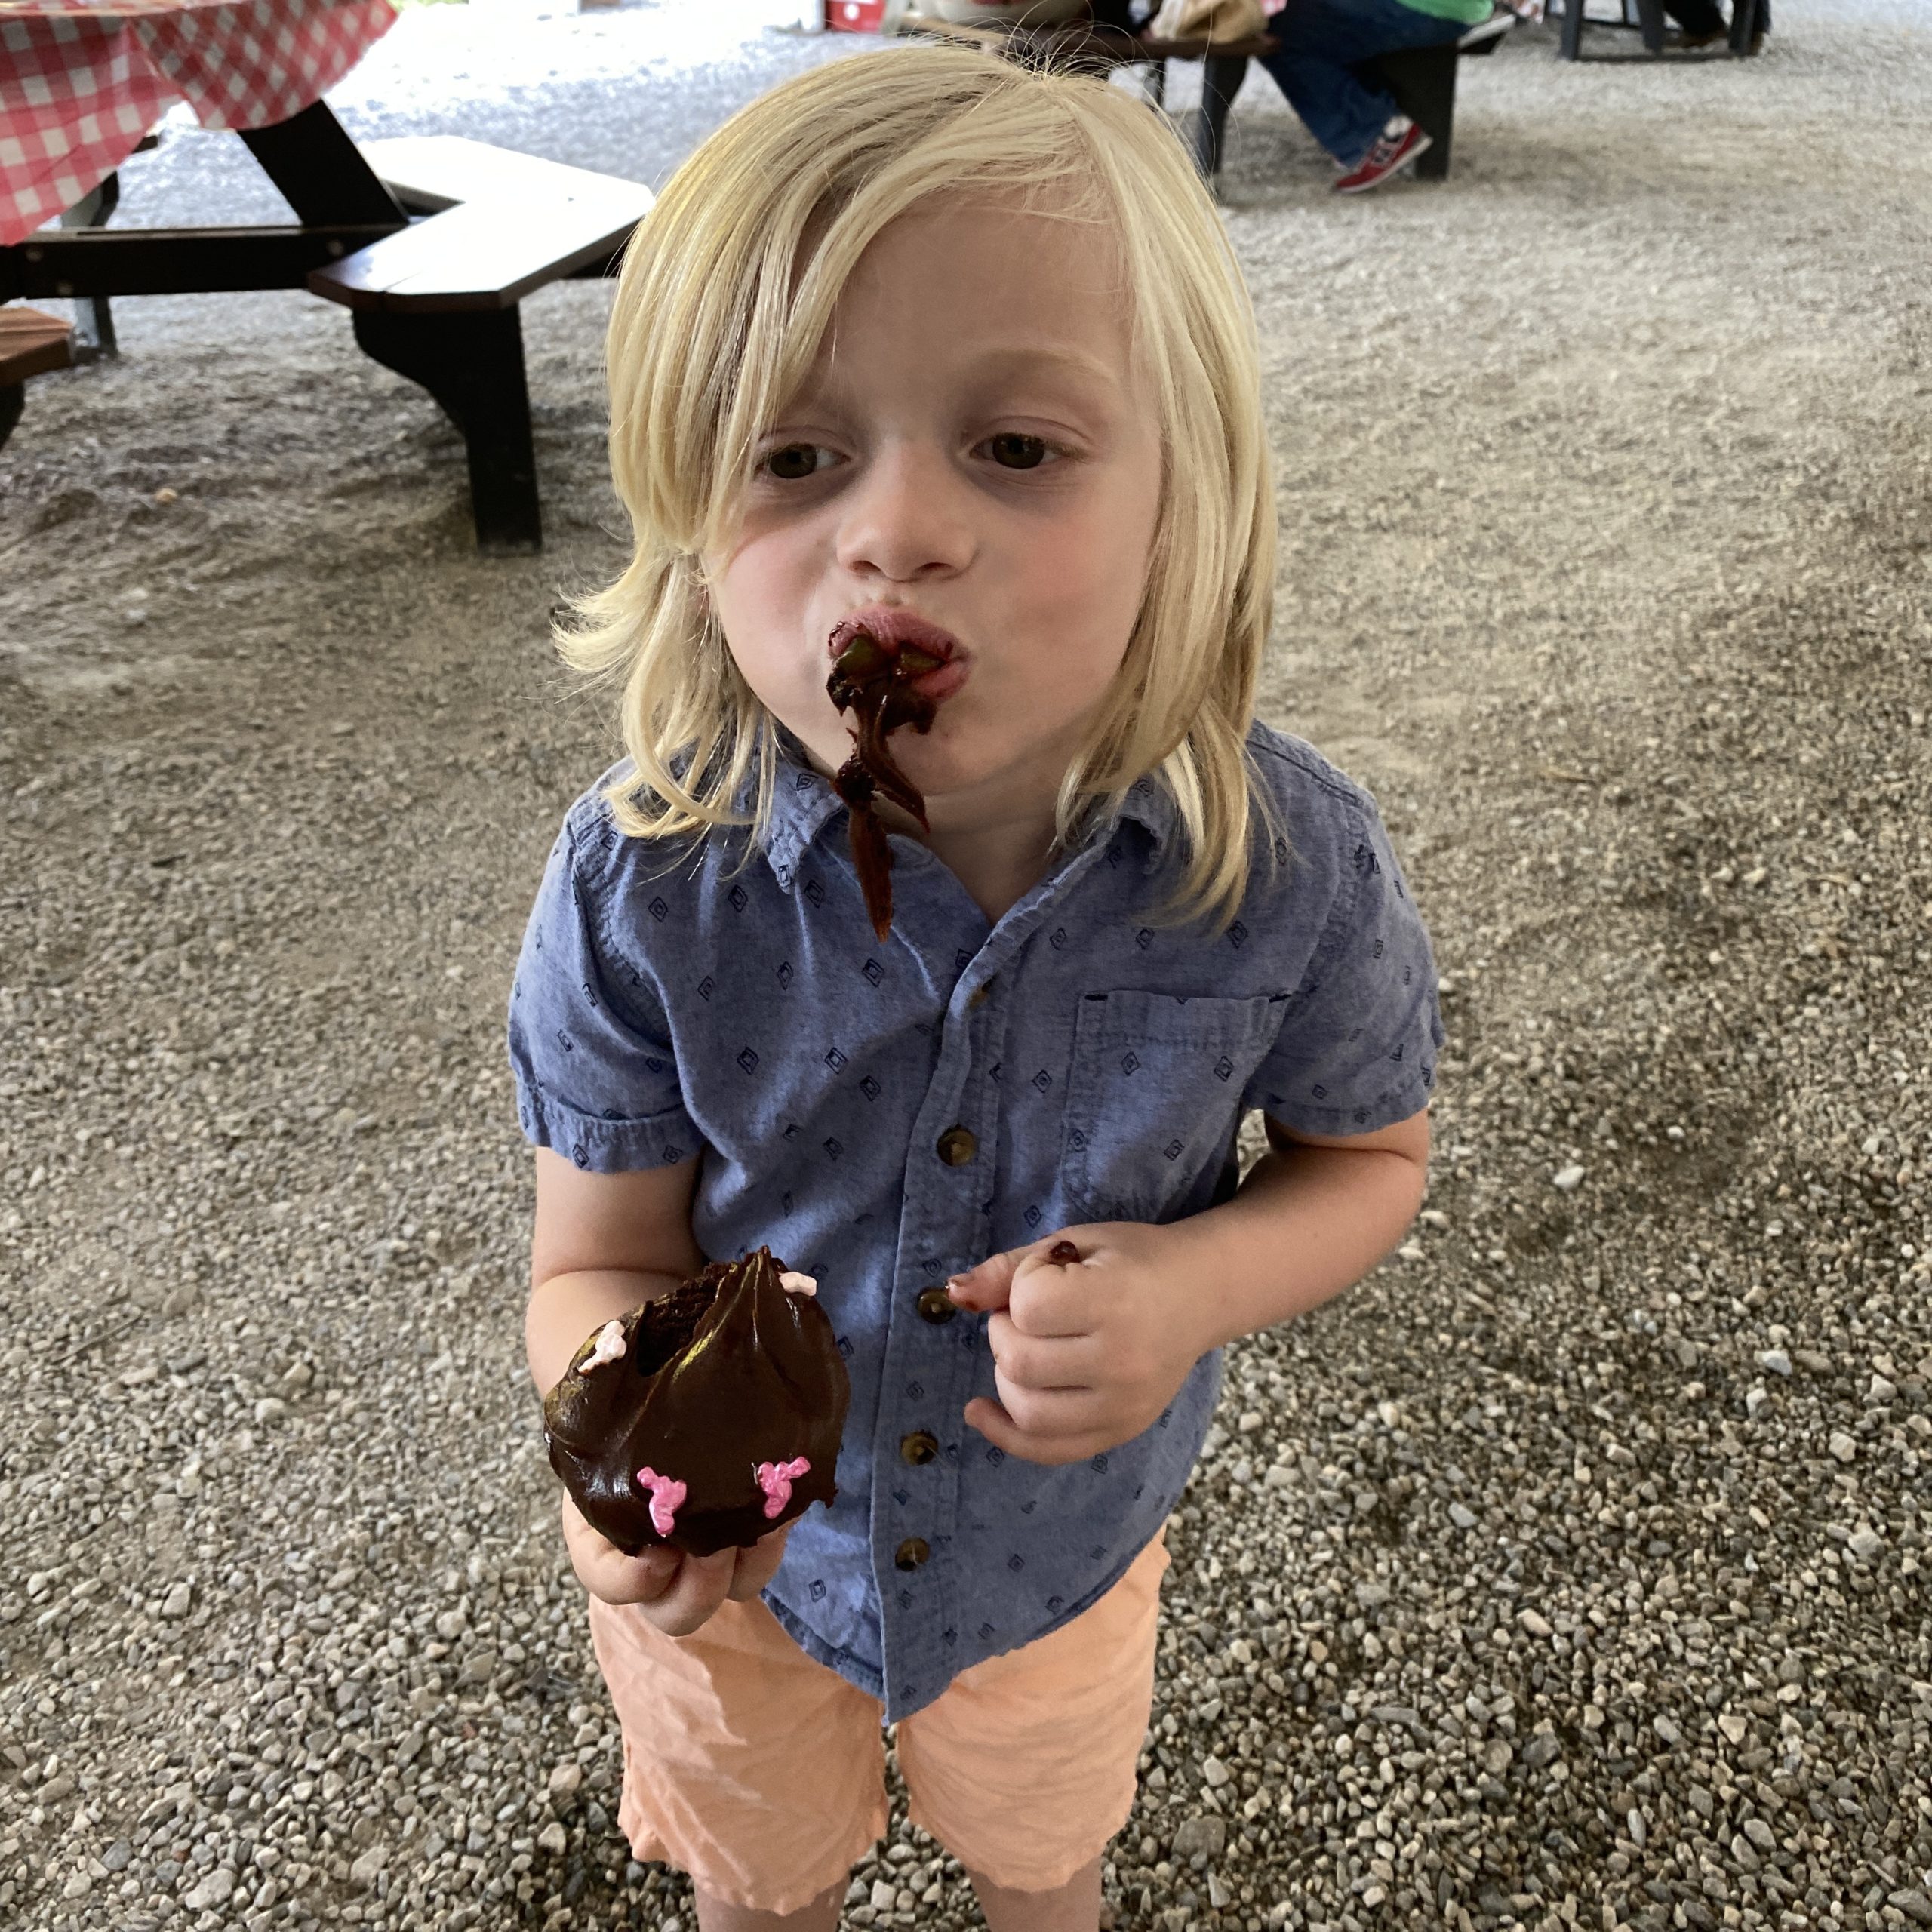 A boy is eating a chocolate cupcake